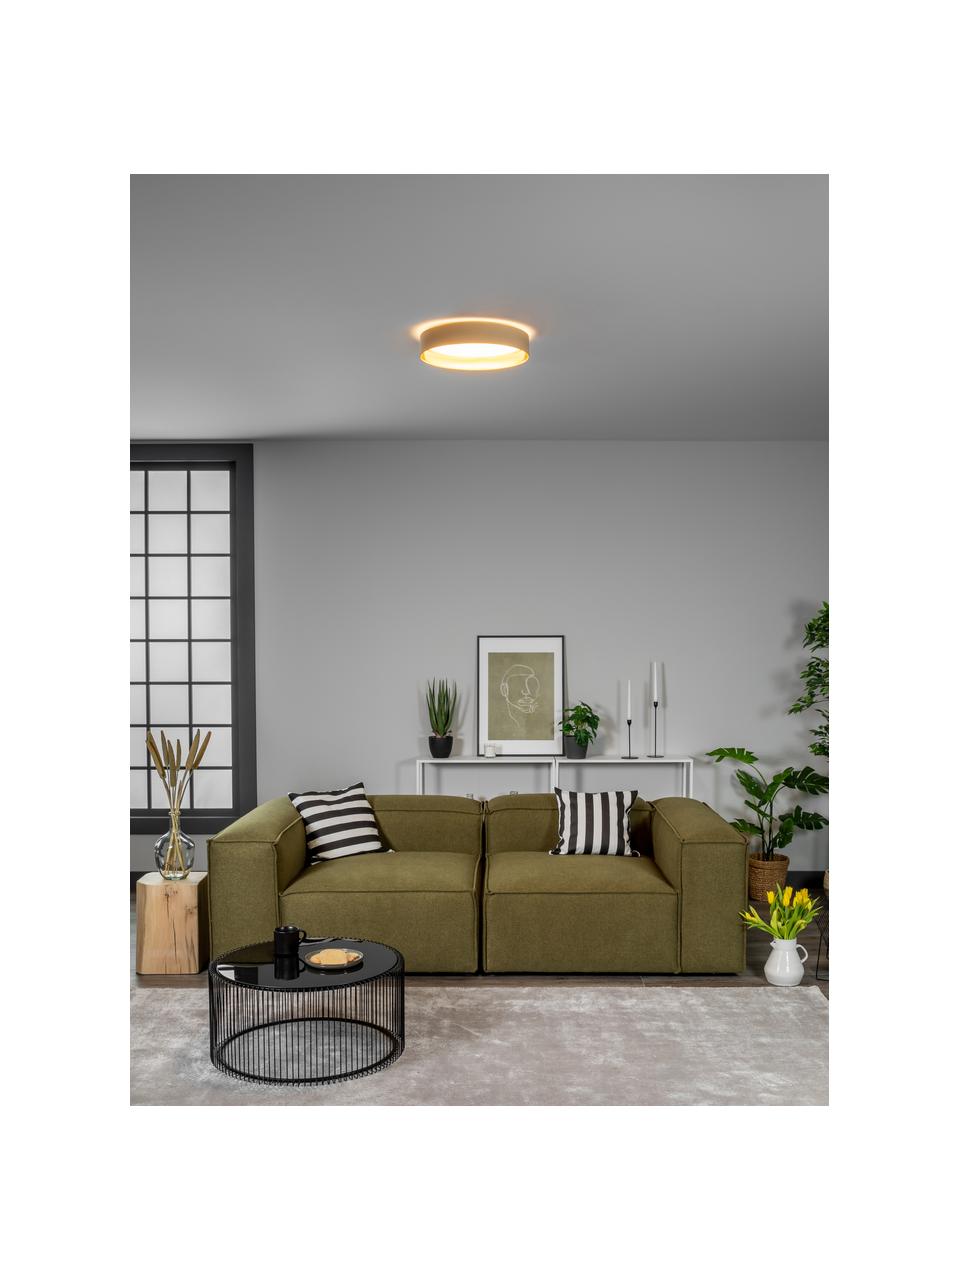 LED-Deckenleuchte Mallory in Taupe, Diffusorscheibe: Kunststoff, Taupe, Ø 41 x H 10 cm